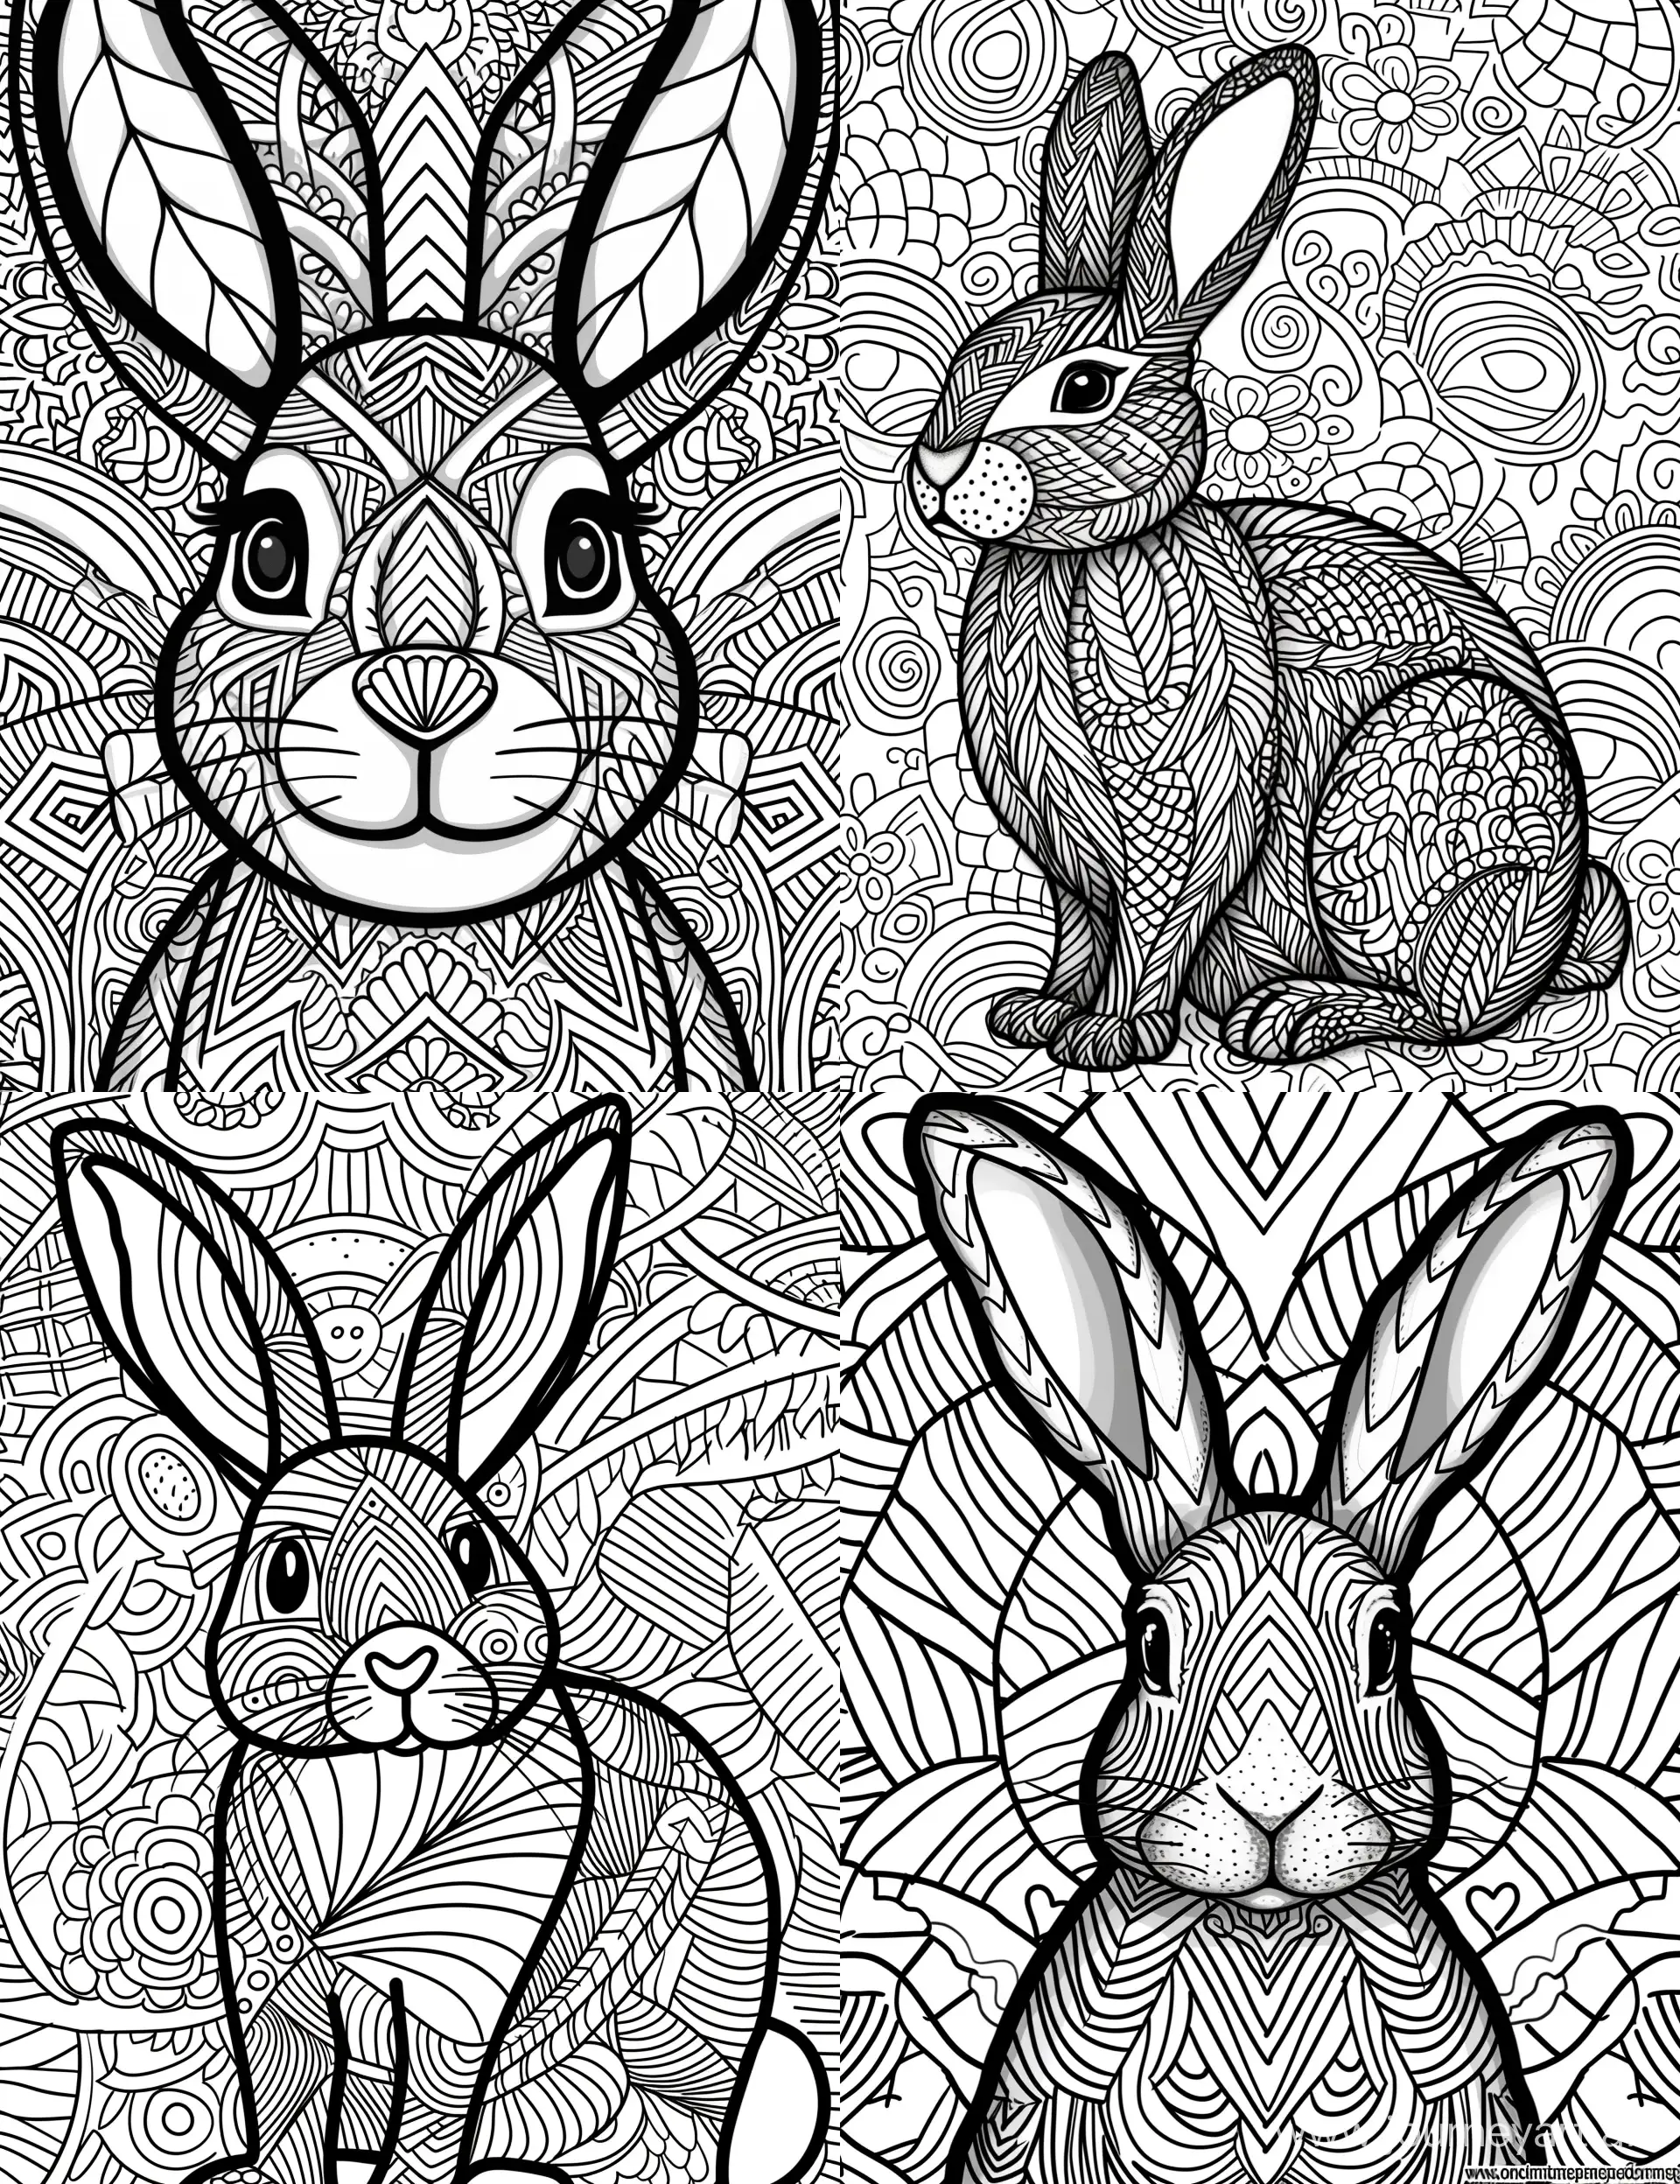 Easter-Bunny-Cartoon-Coloring-Page-with-Curvy-Patterned-Background